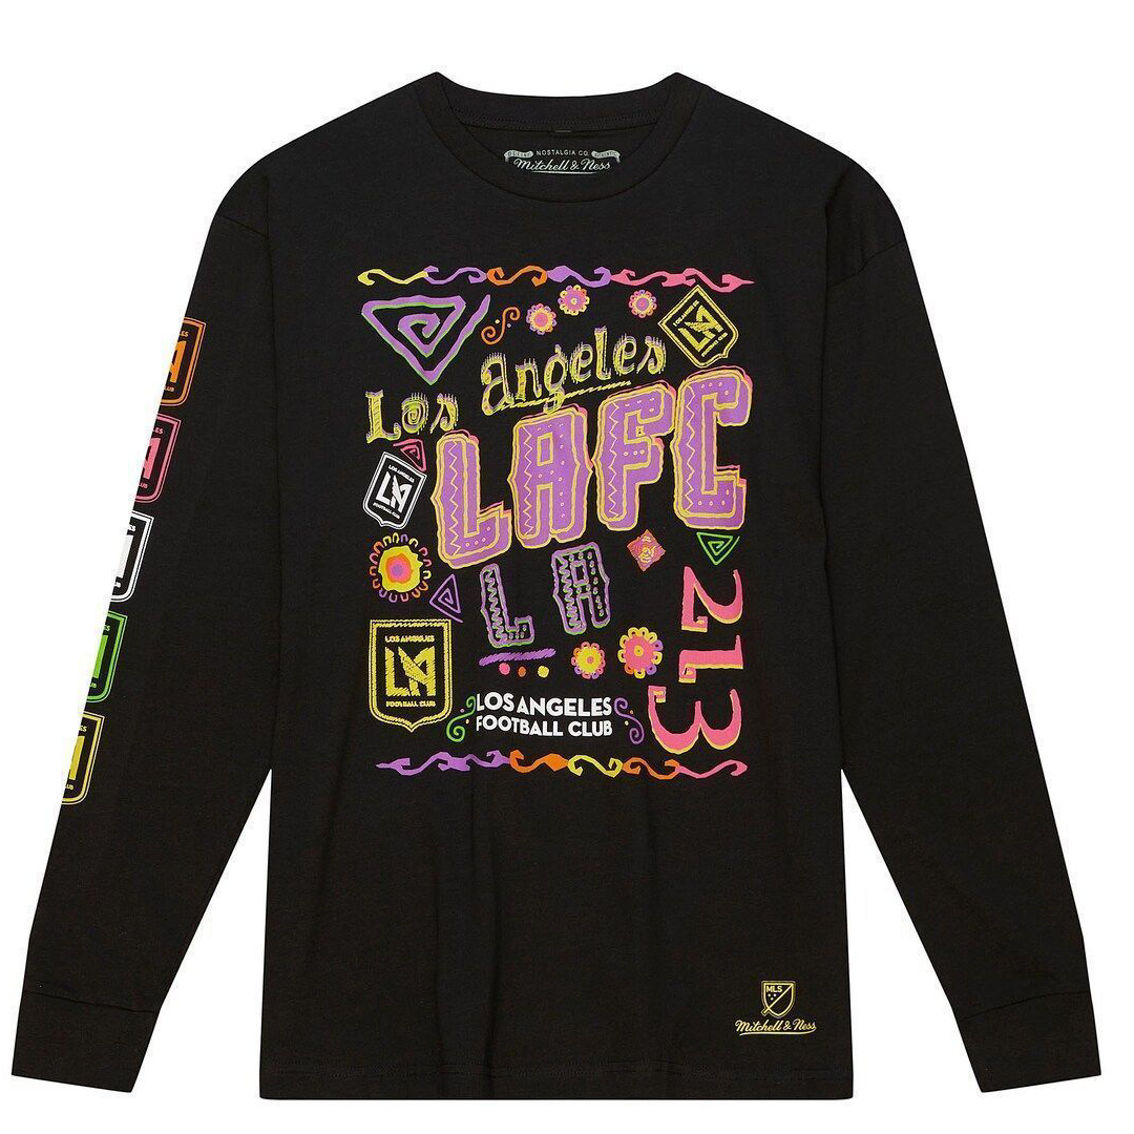 Mitchell & Ness Men's Black LAFC Papel Picado Long Sleeve T-Shirt - Image 3 of 4